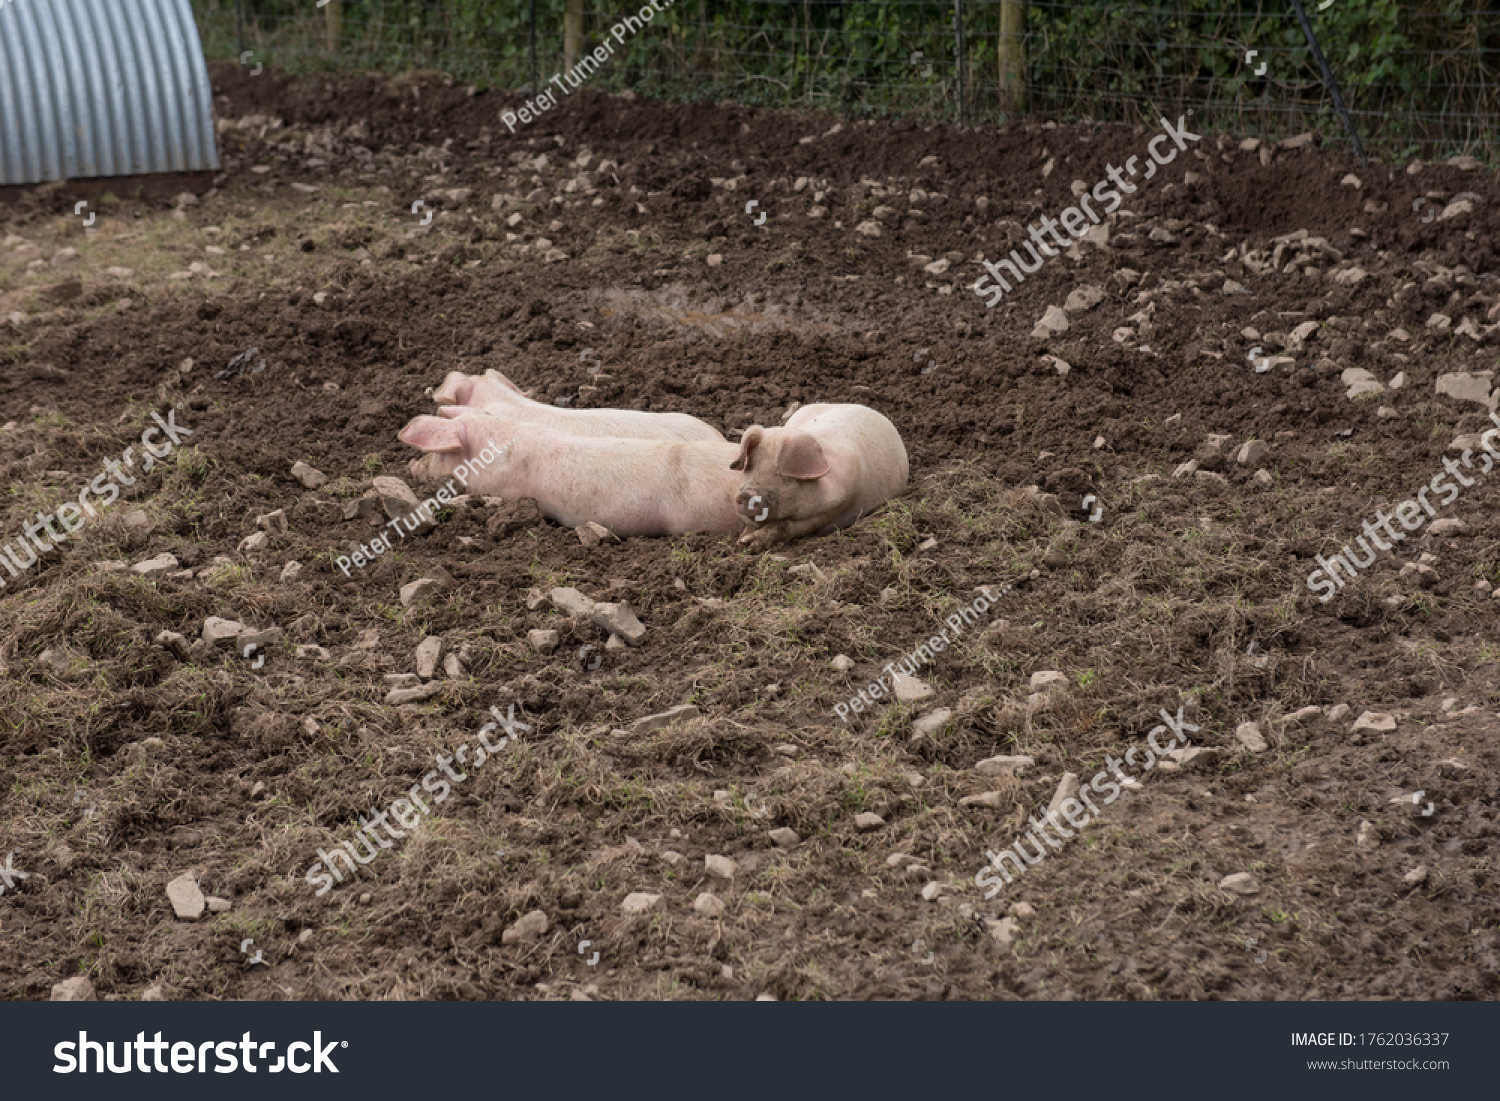 Domestic Pigs (Sus scrofa domesticus) Wallowing in Mud on a Farm in Rural Devon, England, UK #1762036337